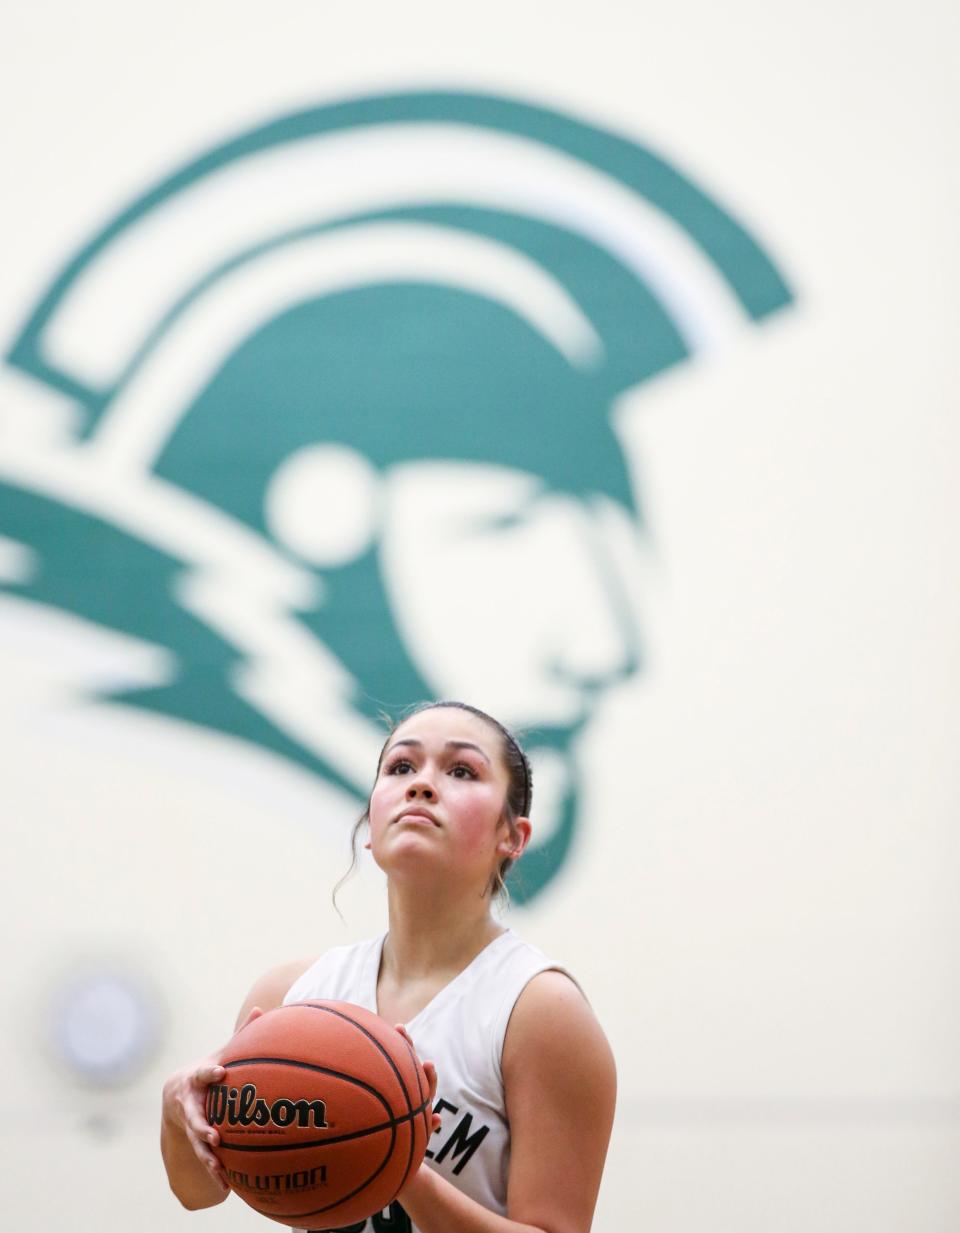 West Salem's Emma Zuniga (24) in the playoff game against Tigard on Tuesday, Feb. 28, 2023 in West Salem, Ore.